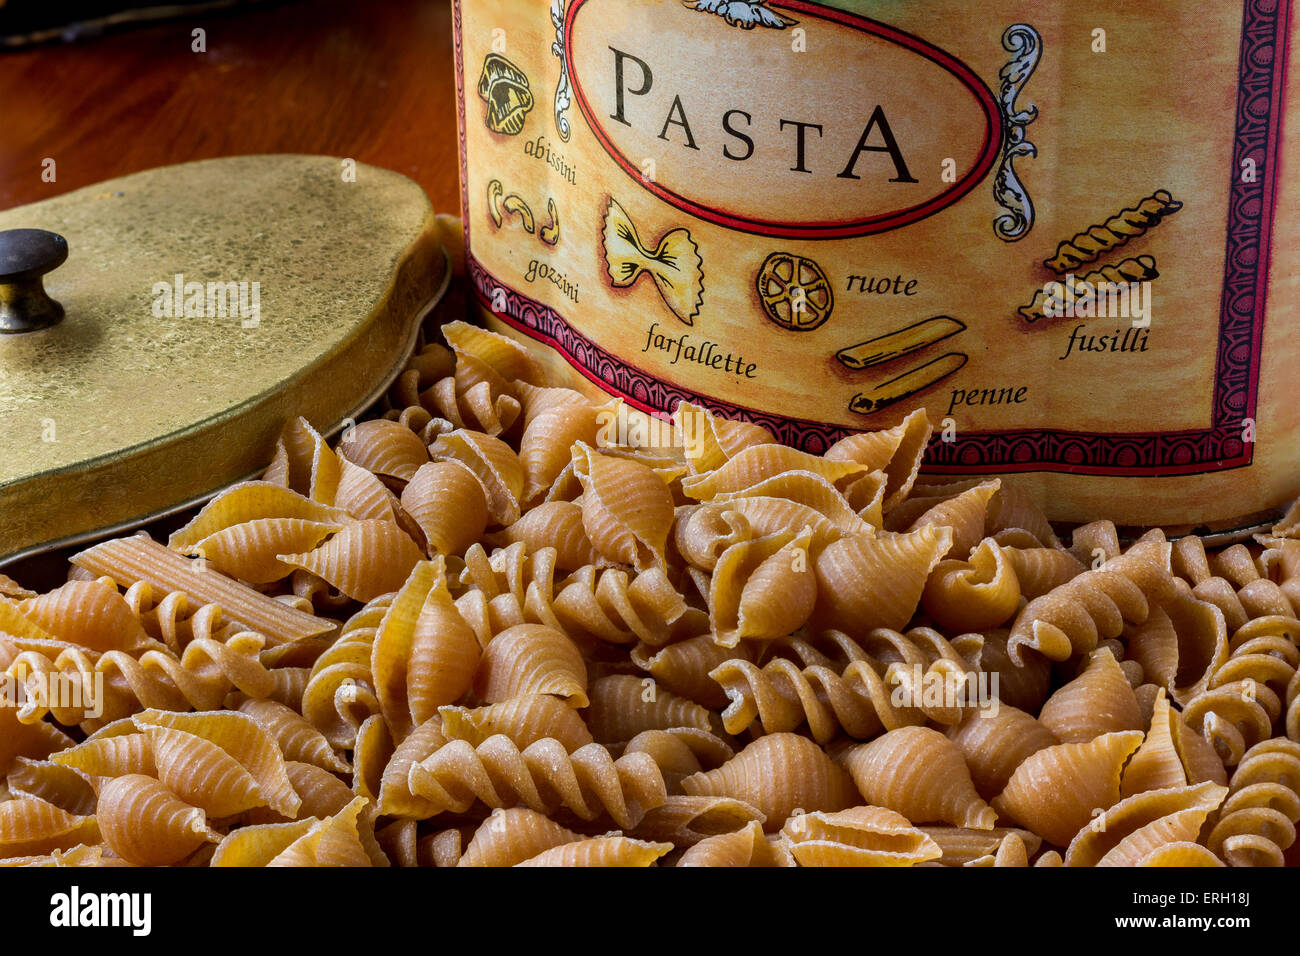 A sampling of Italian whole wheat pasta.  This type of pasta is lower on the glycemic index making it a healthier choice. Stock Photo